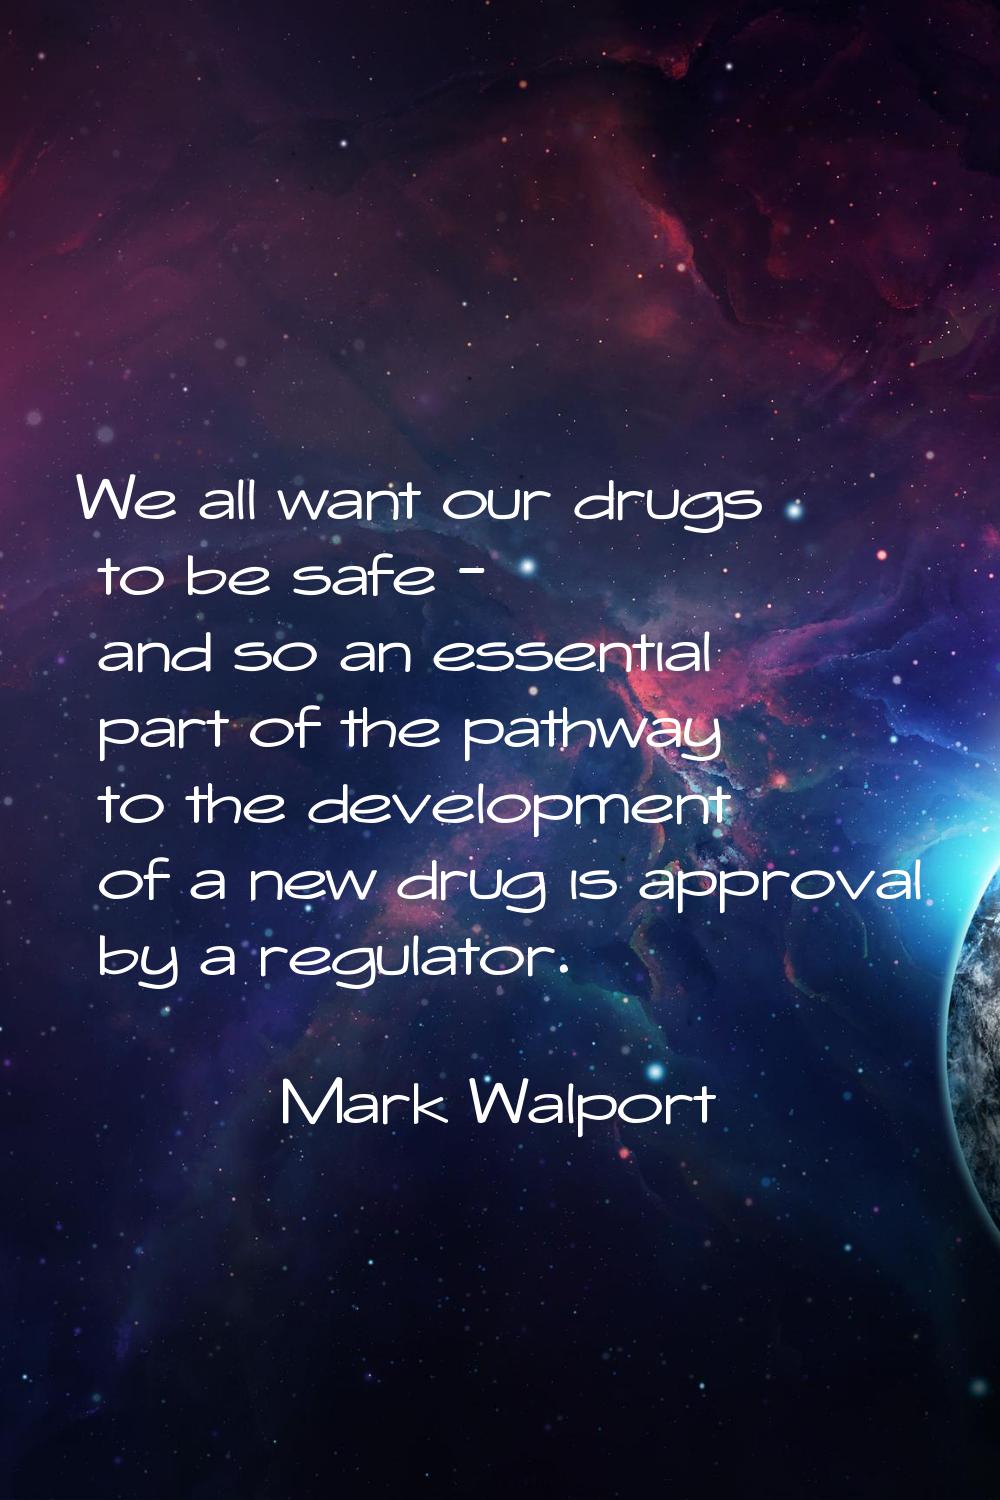 We all want our drugs to be safe - and so an essential part of the pathway to the development of a 